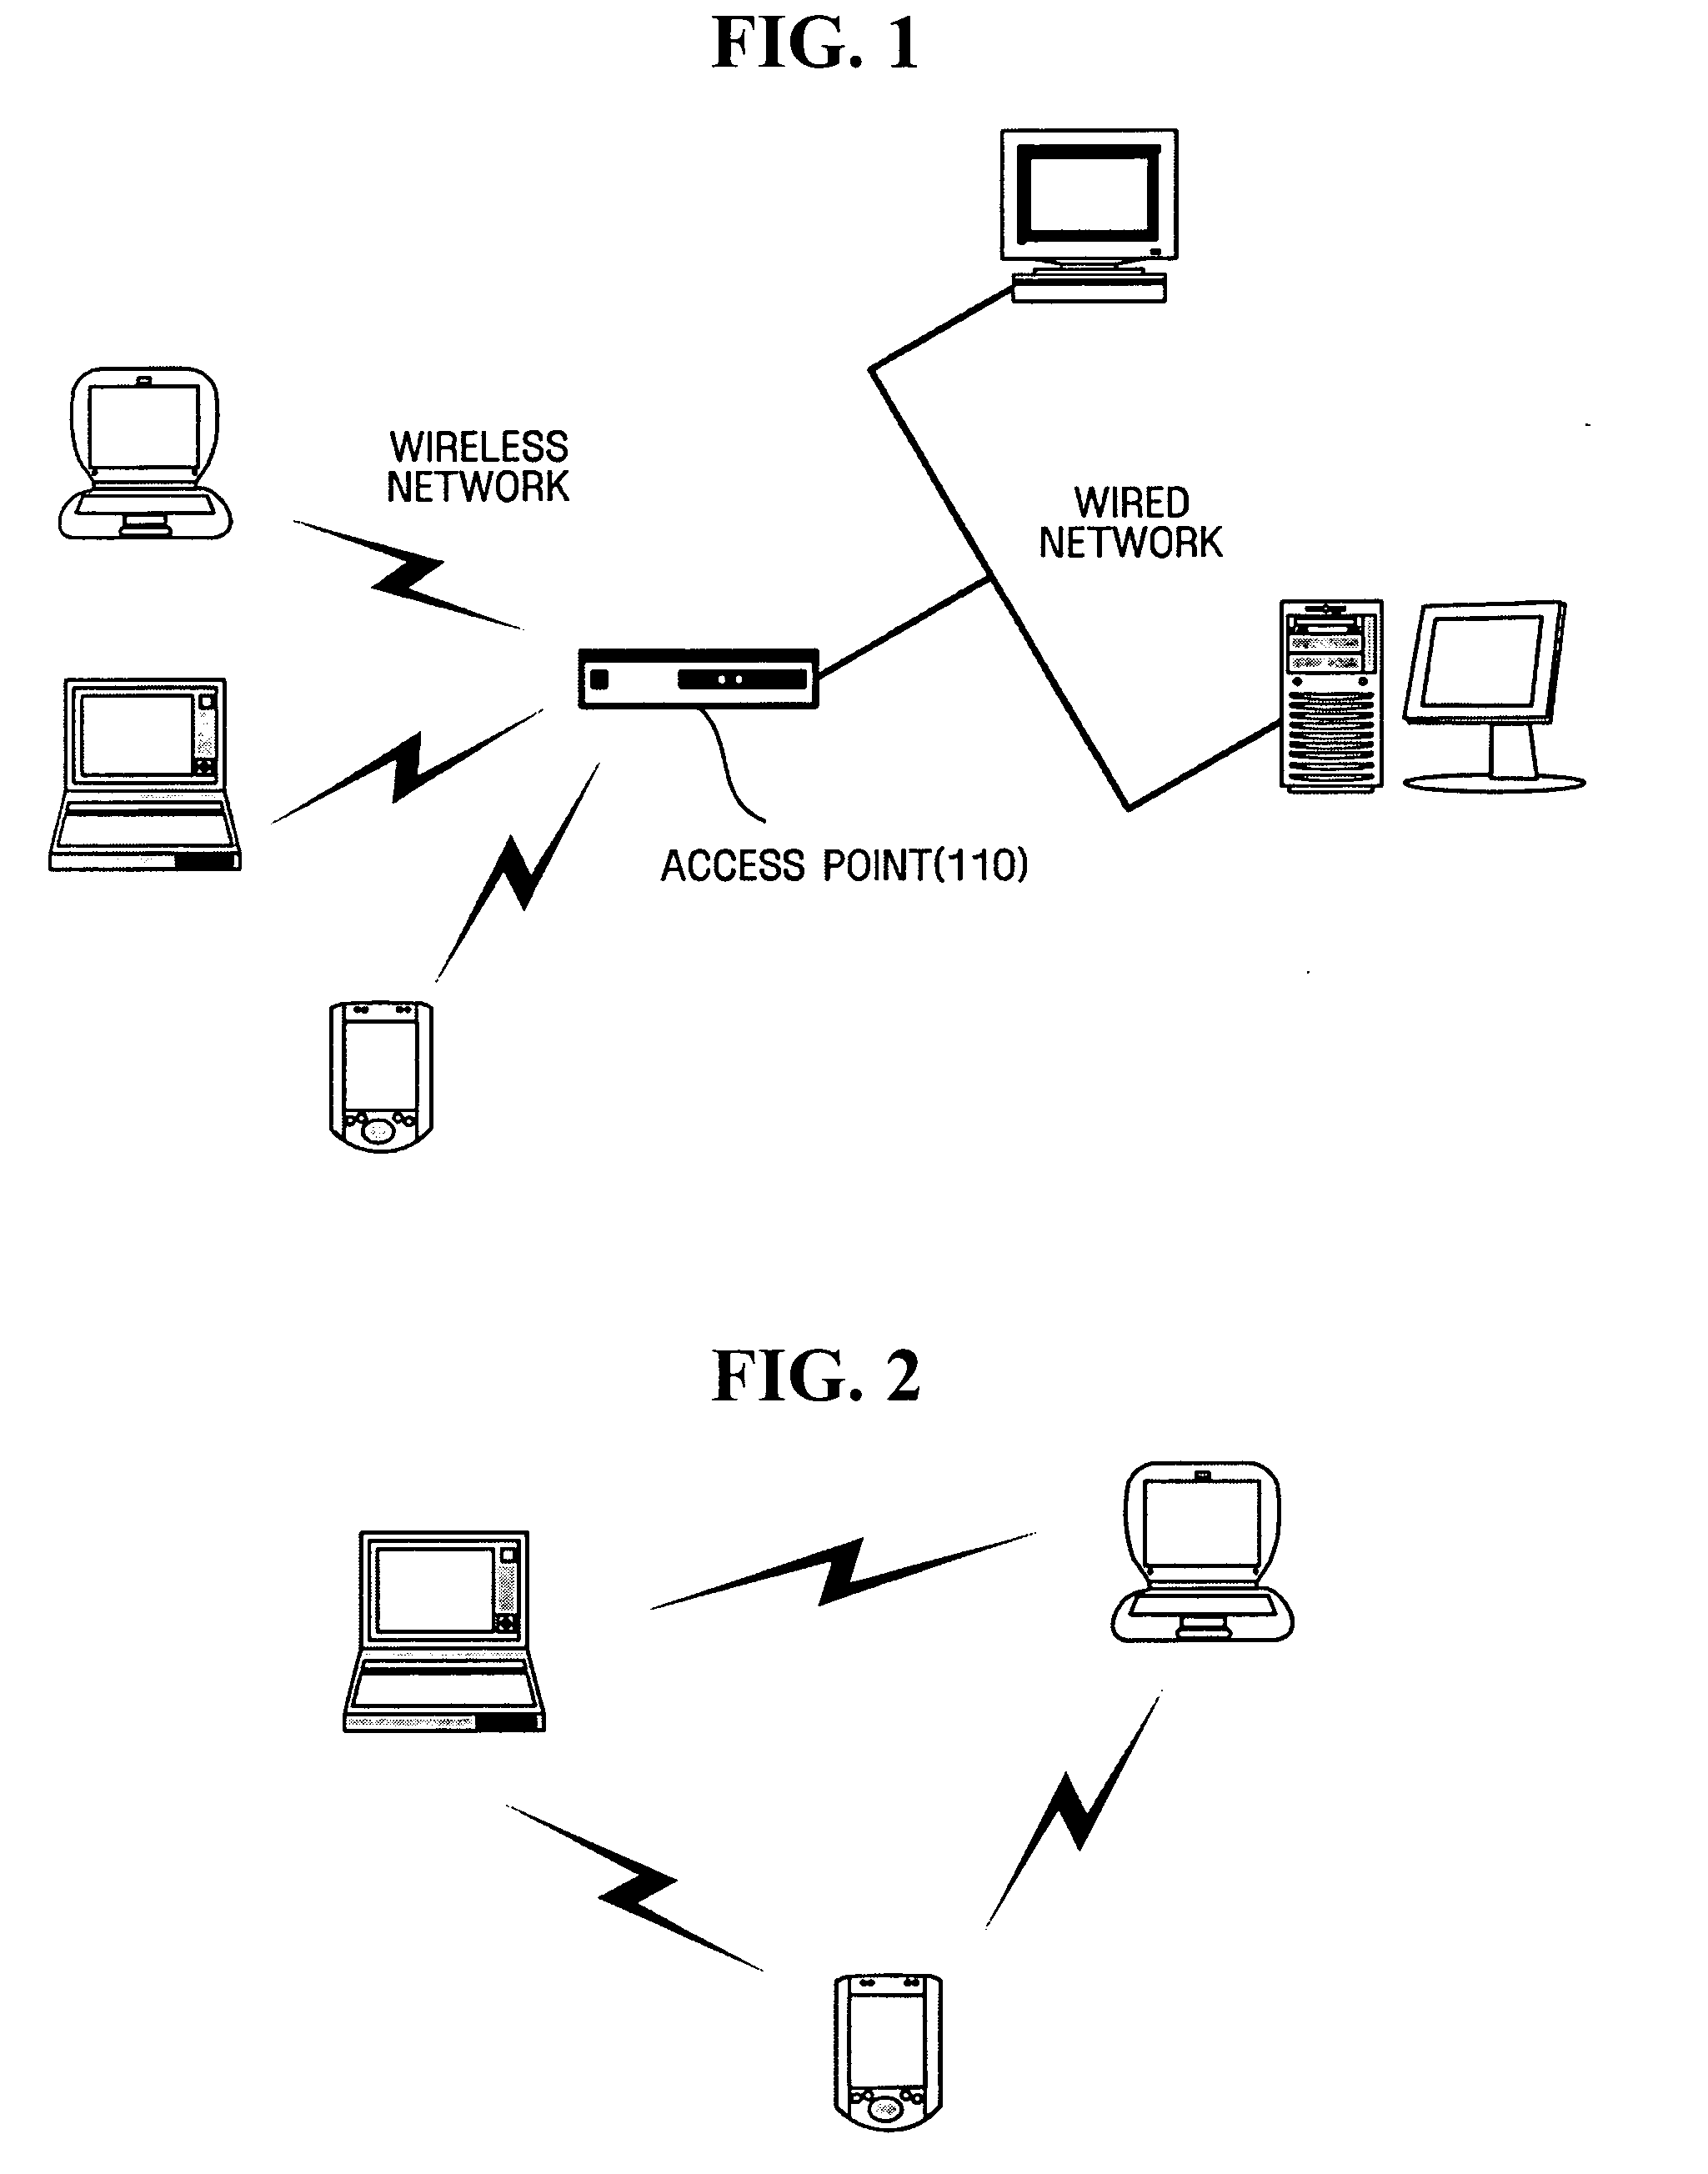 Method and apparatus for supporting multiple wireless universal serial bus (USB) hosts in coordinator-based wireless network